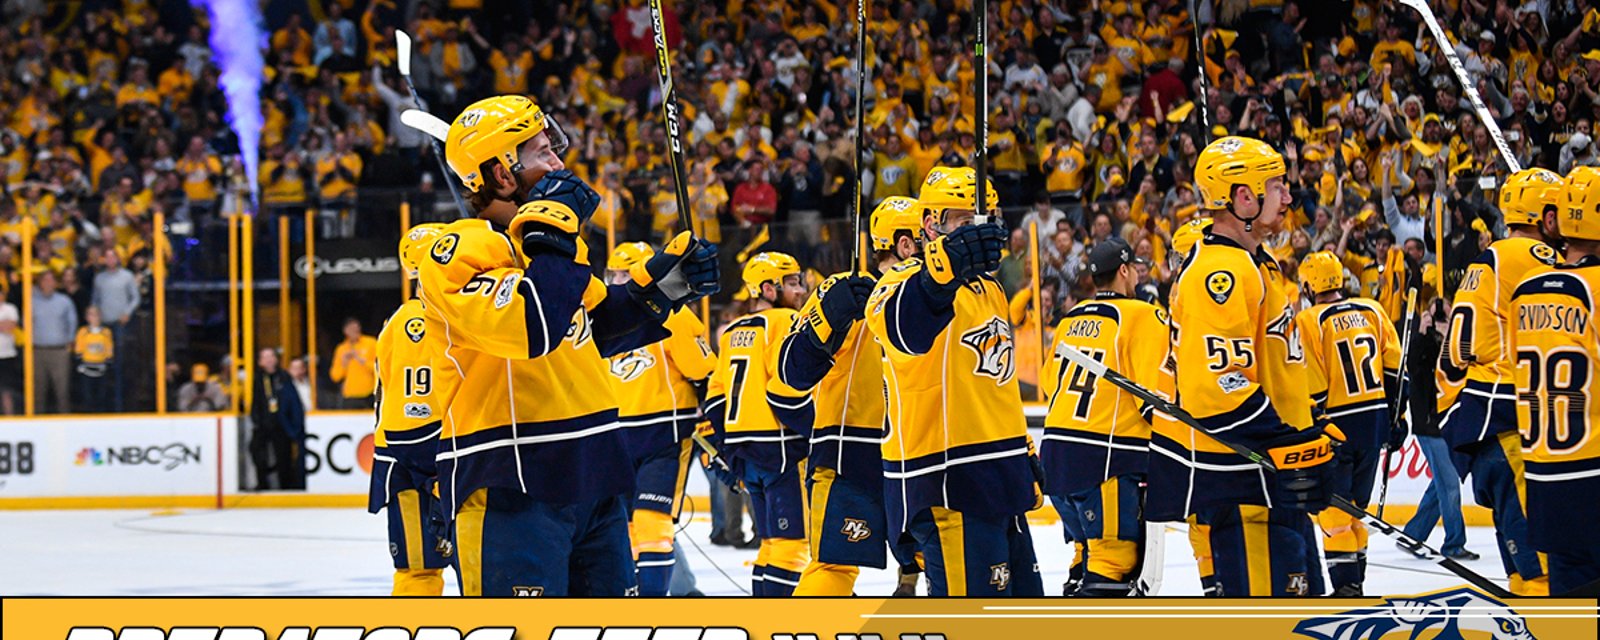 Gotta See It: Photo PERFECTLY sums up Preds Fever right now